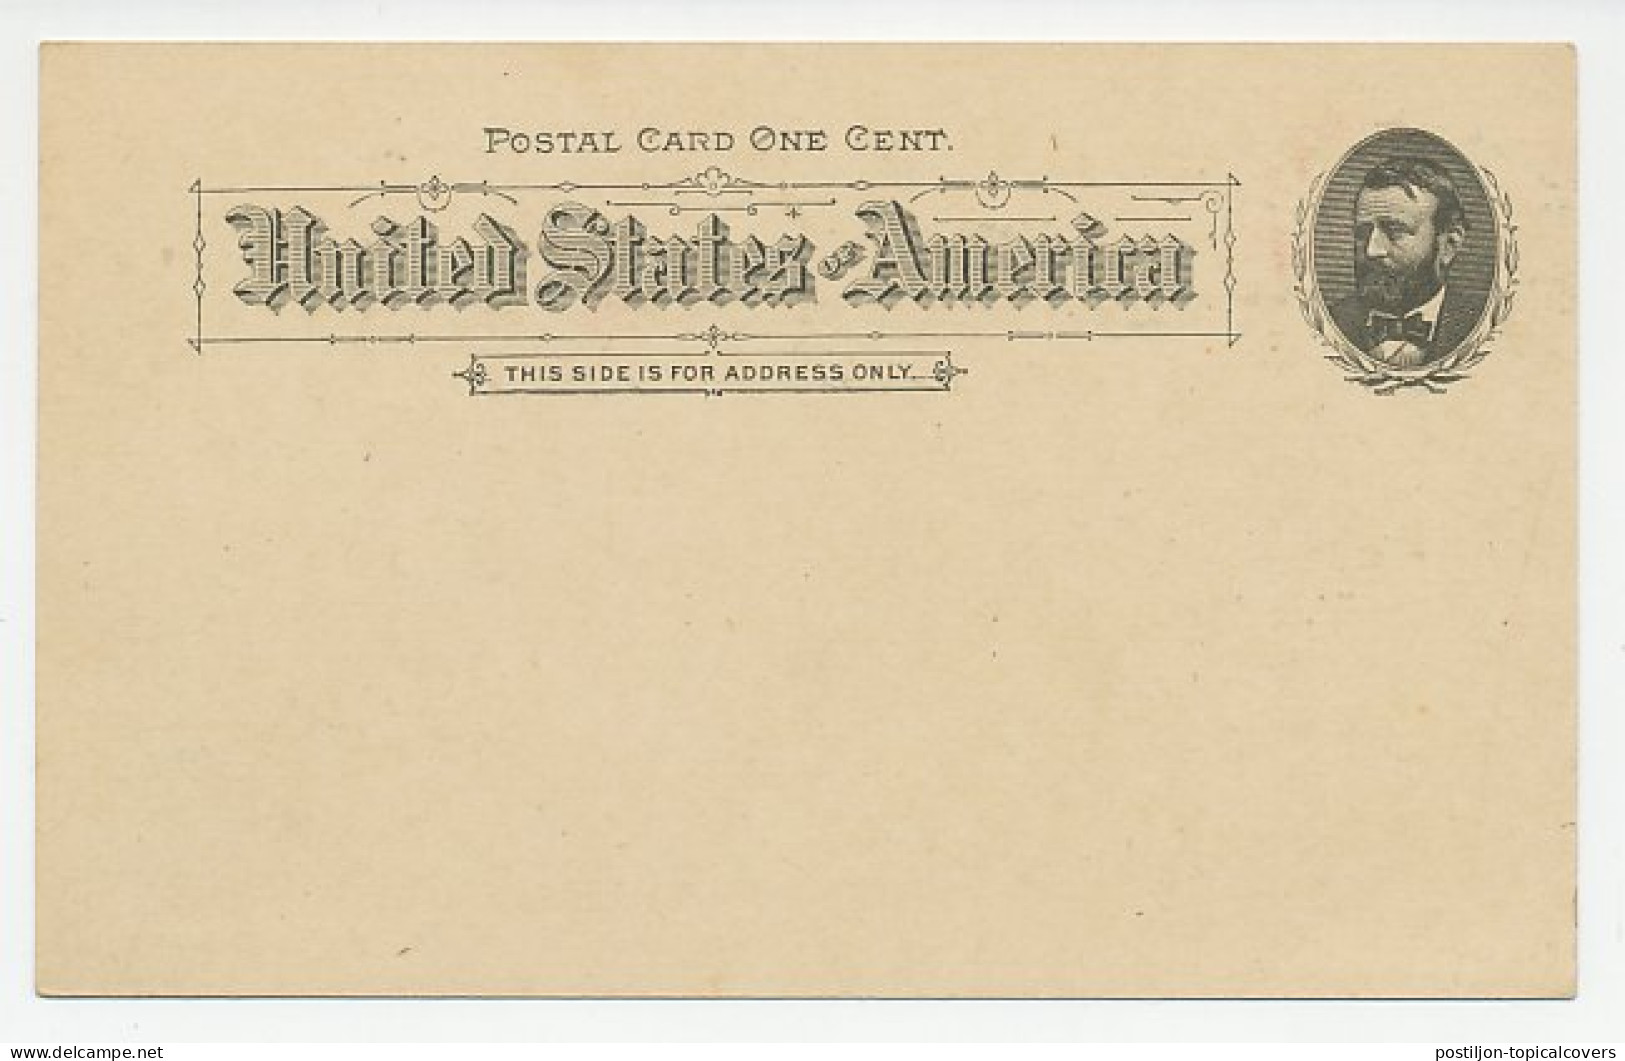 Postal Stationery USA 1893 World S Columbian Exposition - The Fisheries Building - Columbus - Fische